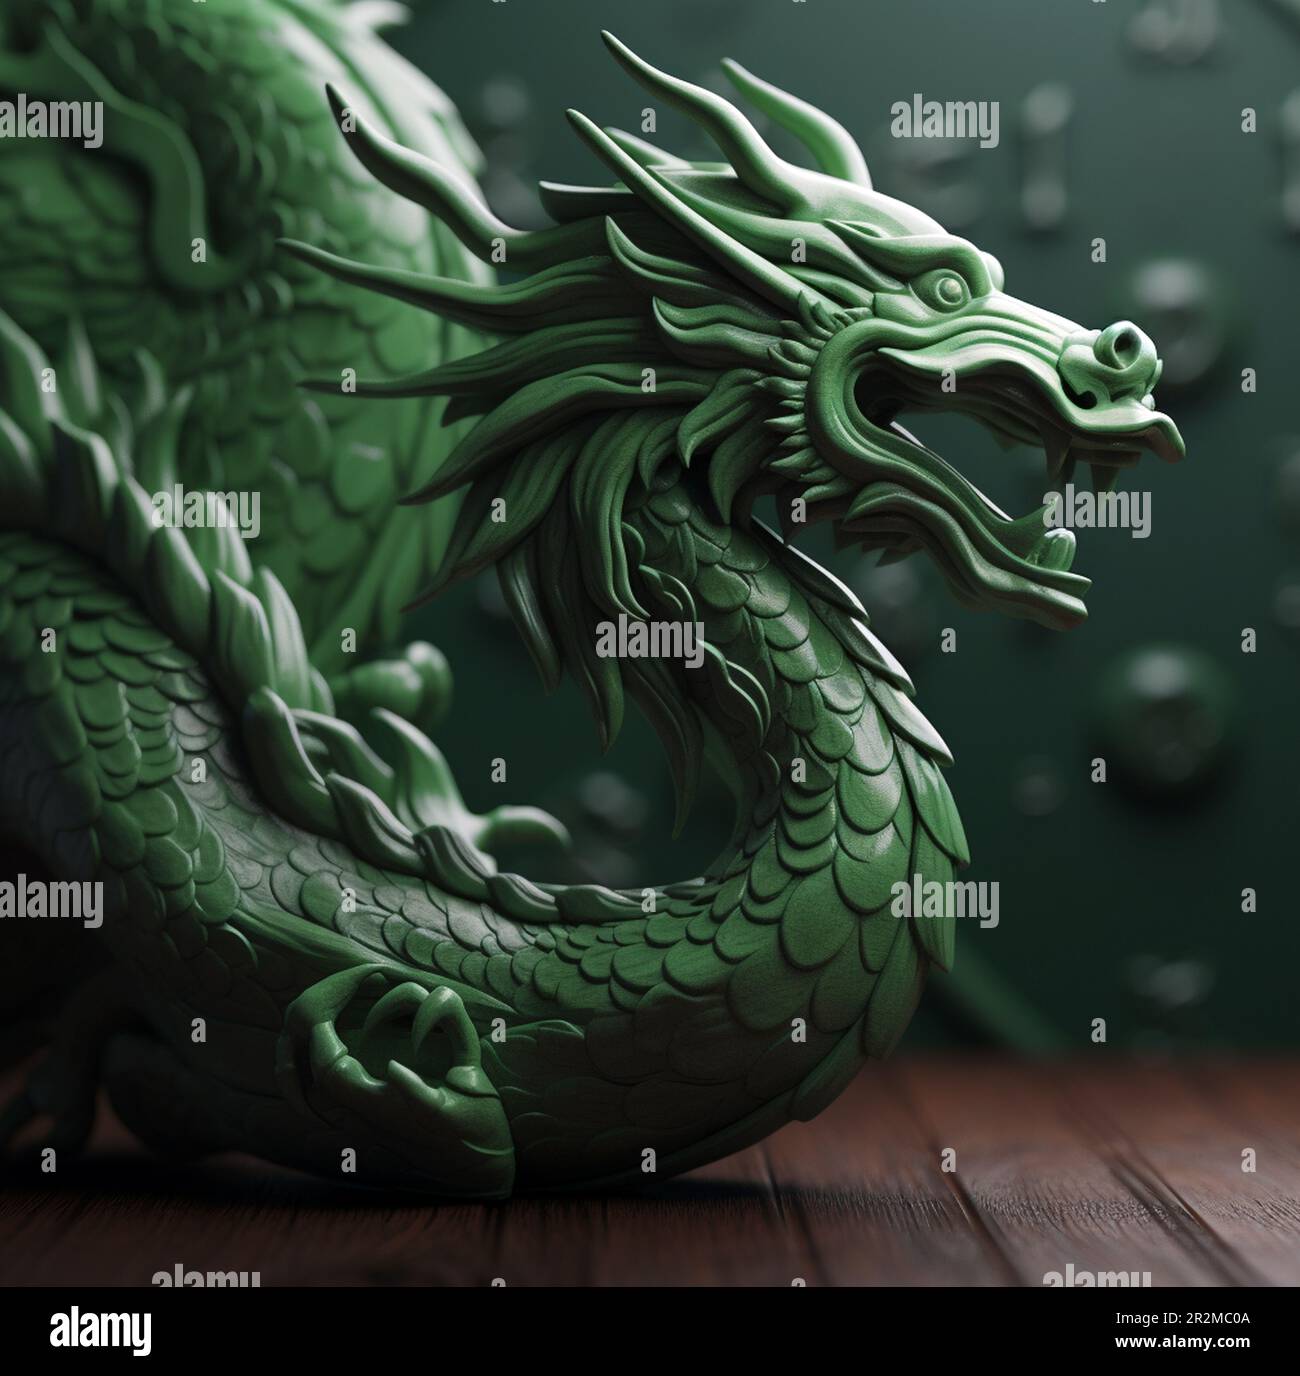 Green wooden dragon, new year 2024. 27594688 Stock Photo at Vecteezy